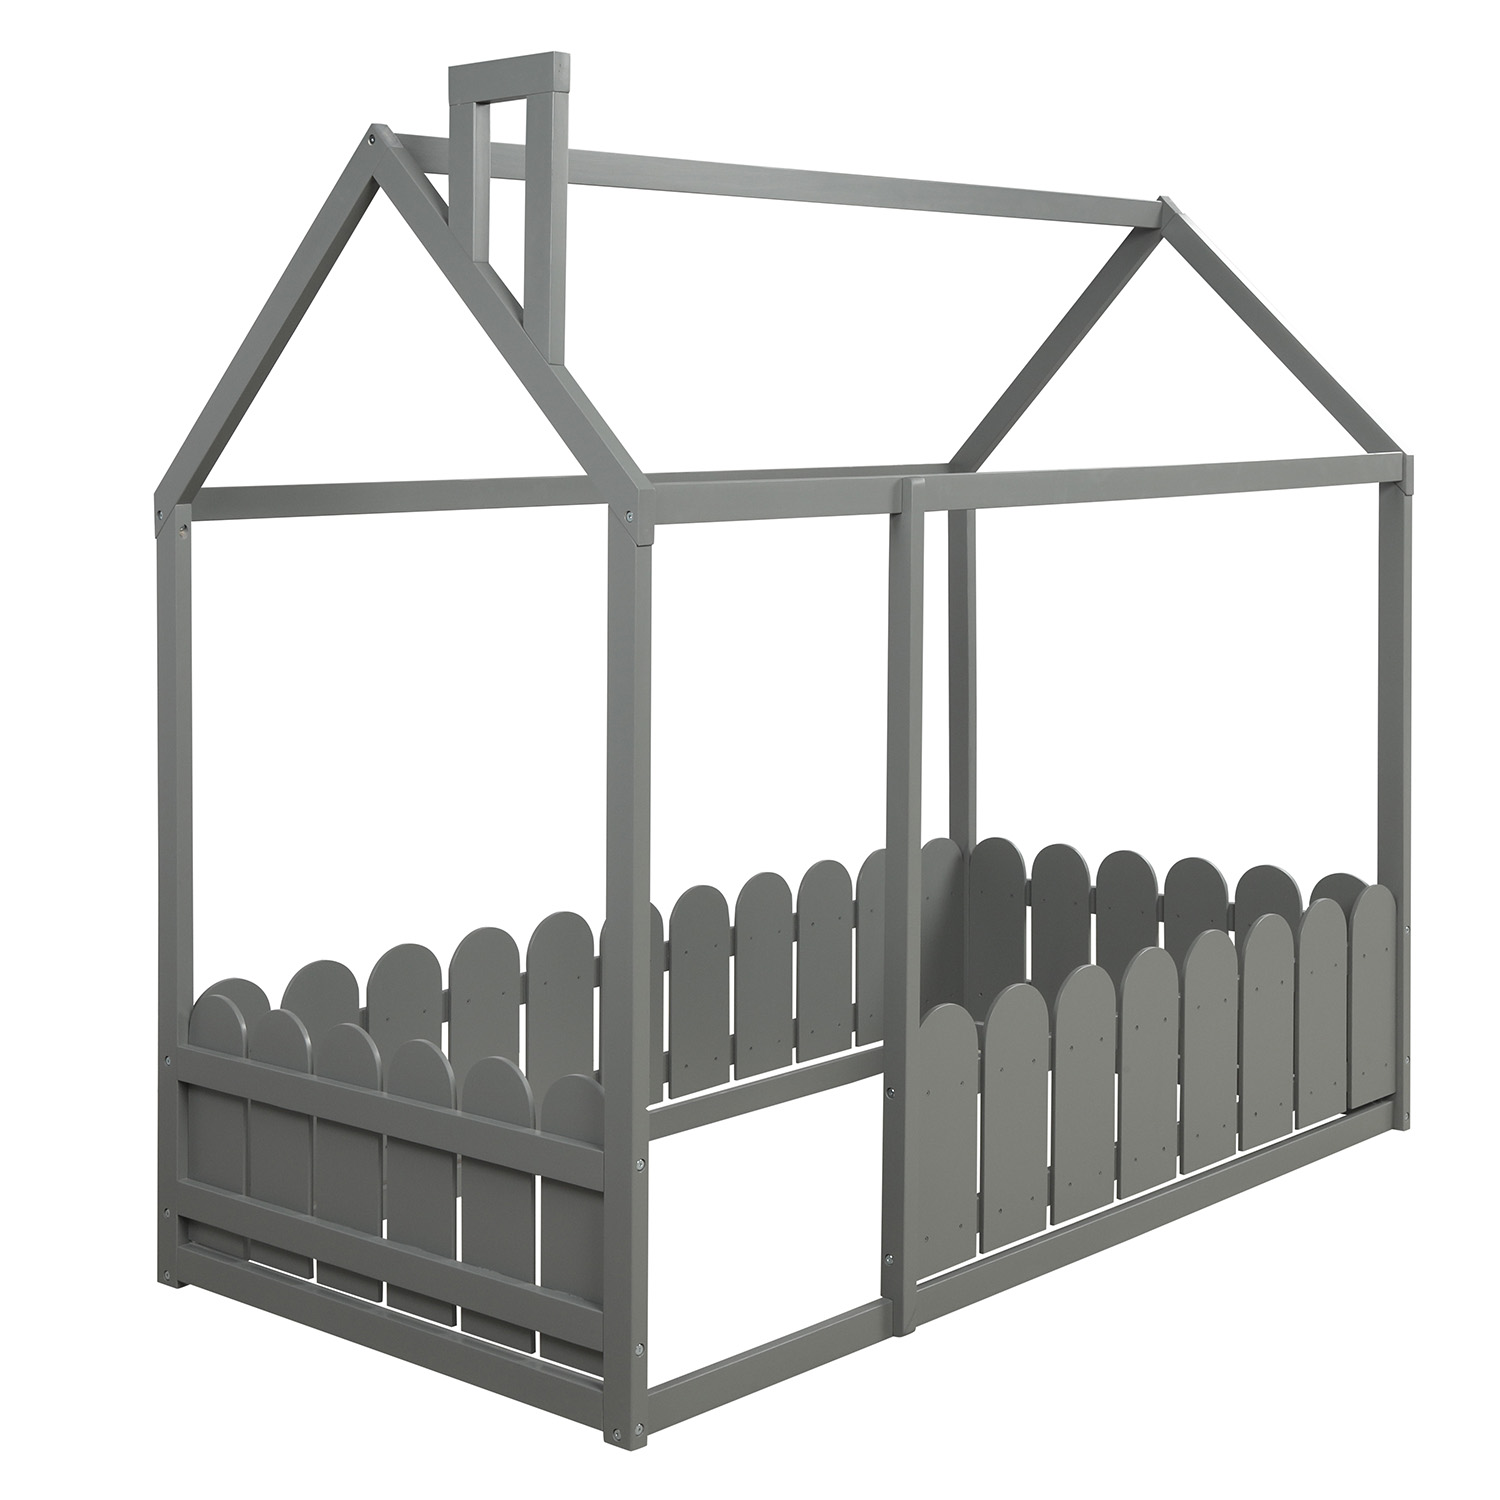 JINS&VICO Twin Size House Bed with Fence, Wood Low Bed Frame with Decorative Roof and Chimney, Playhouse Design Twin Bed for Teens Boys and Girls, Slats are Not Included, Gray - image 3 of 6